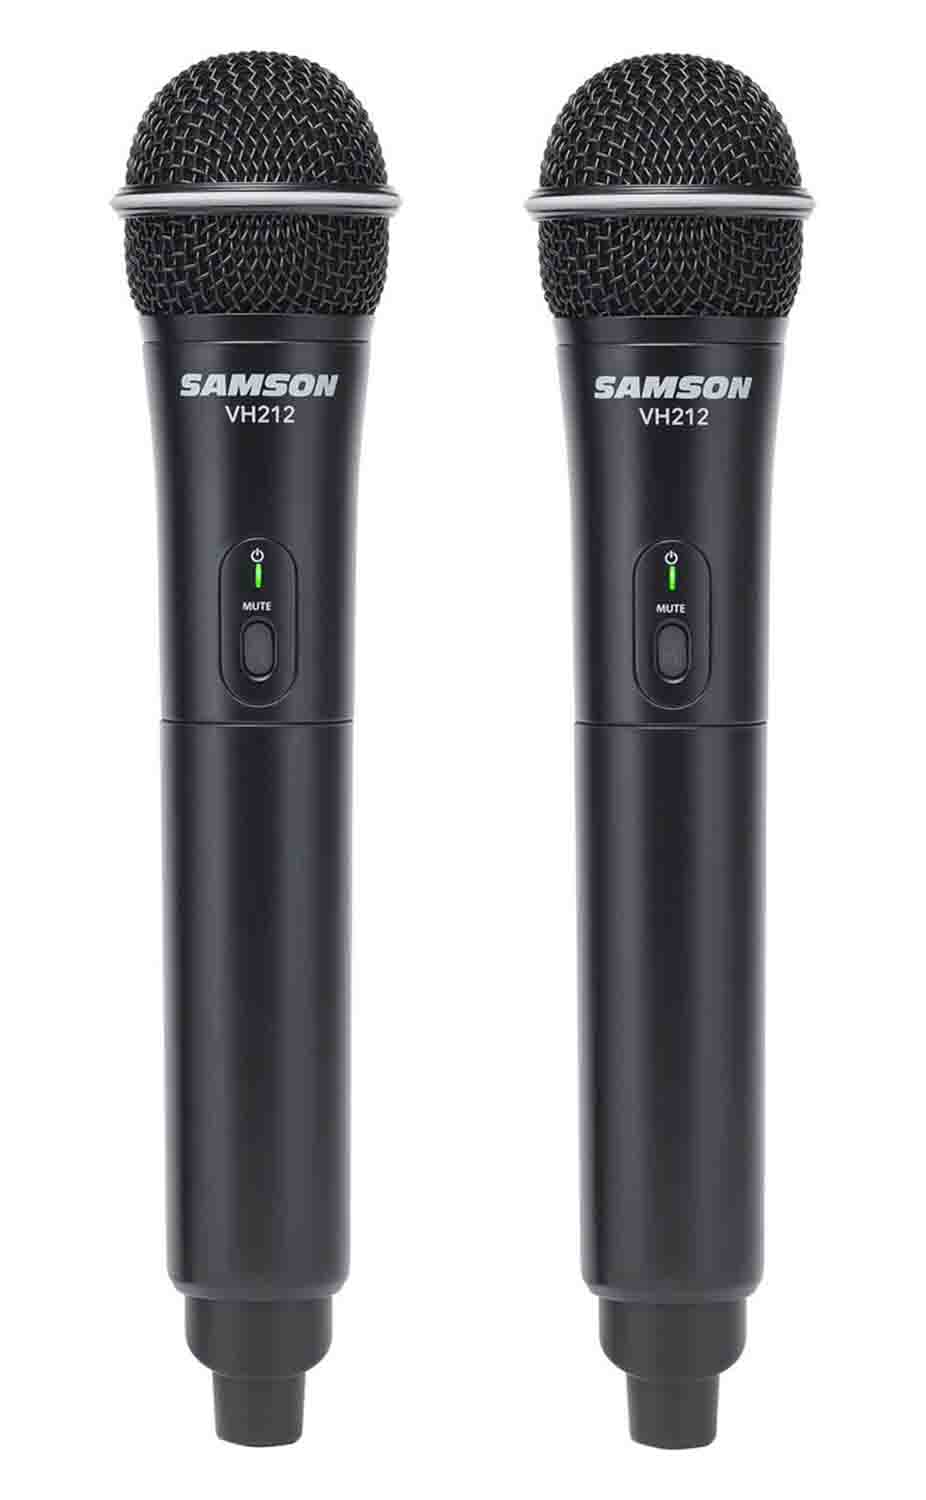 Samson SWS212HH-E, Stage 212 Frequency Agile Dual Channel Handheld VHF Wireless System - 173 to 198 MHz - Hollywood DJ